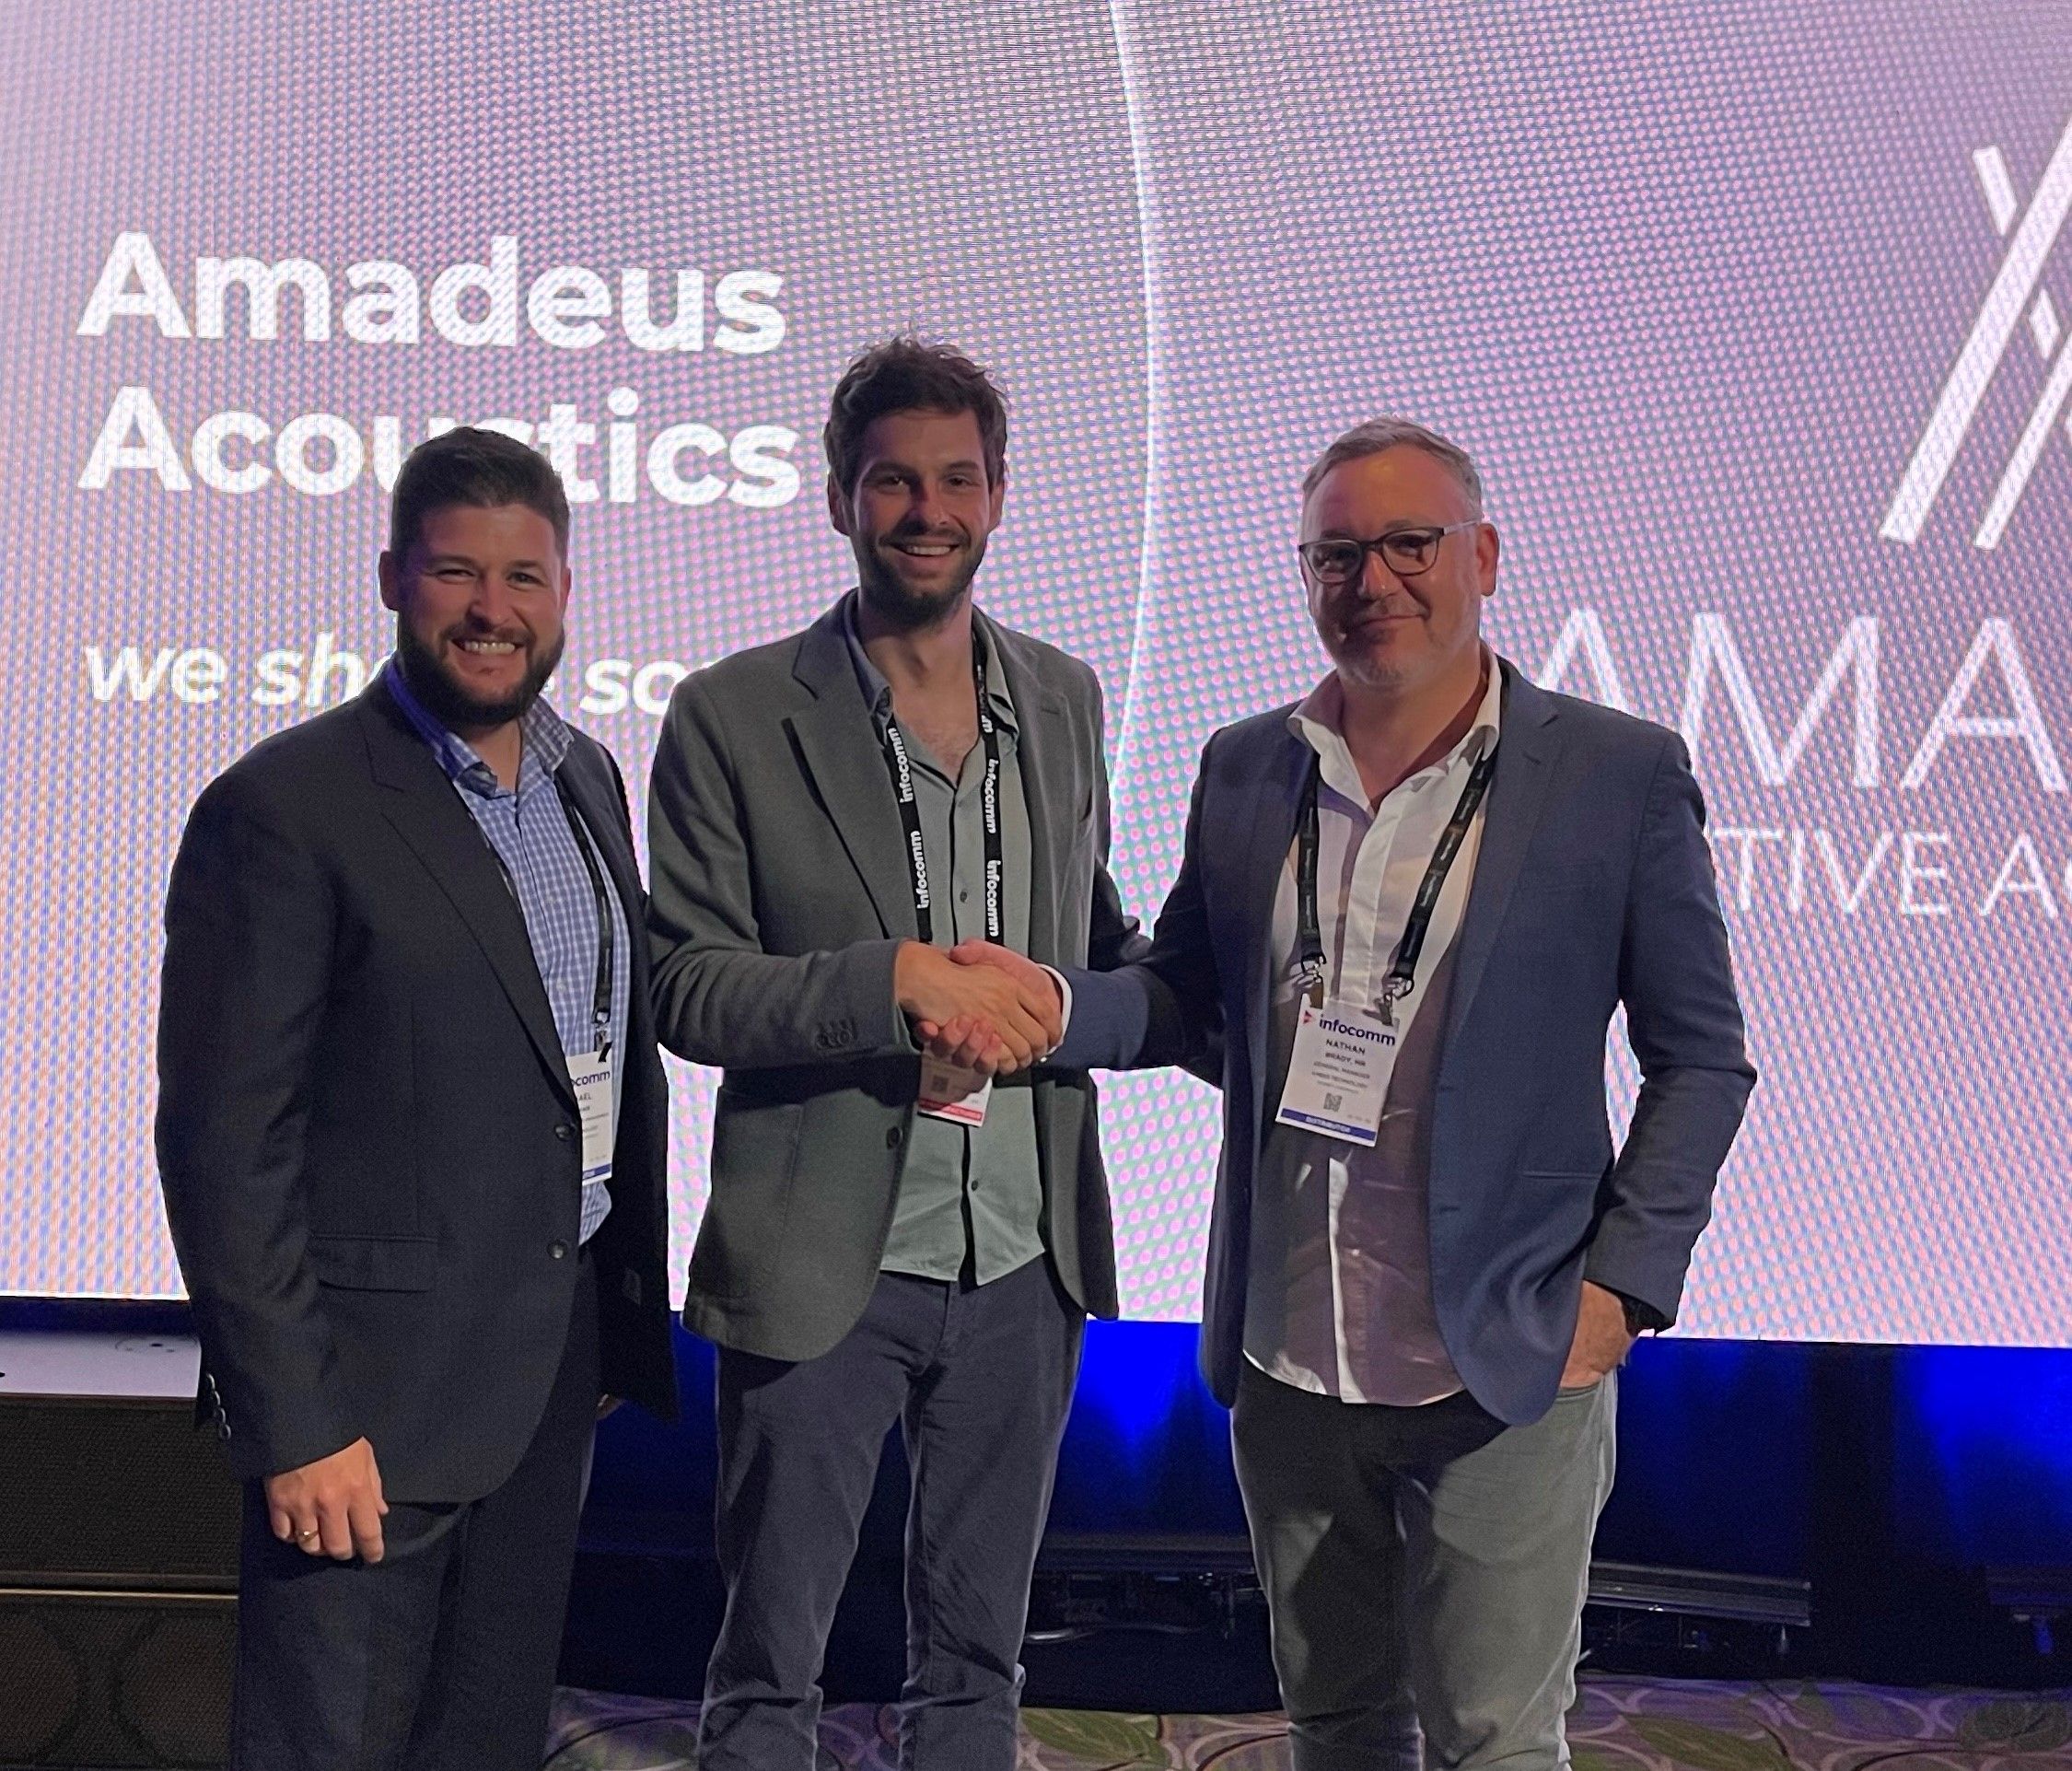 AMADEUS ACOUSTICS APPOINTS AMBER TECHNOLOGY AS DISTRIBUTOR IN AUSTRALIA AND NEW ZEALAND